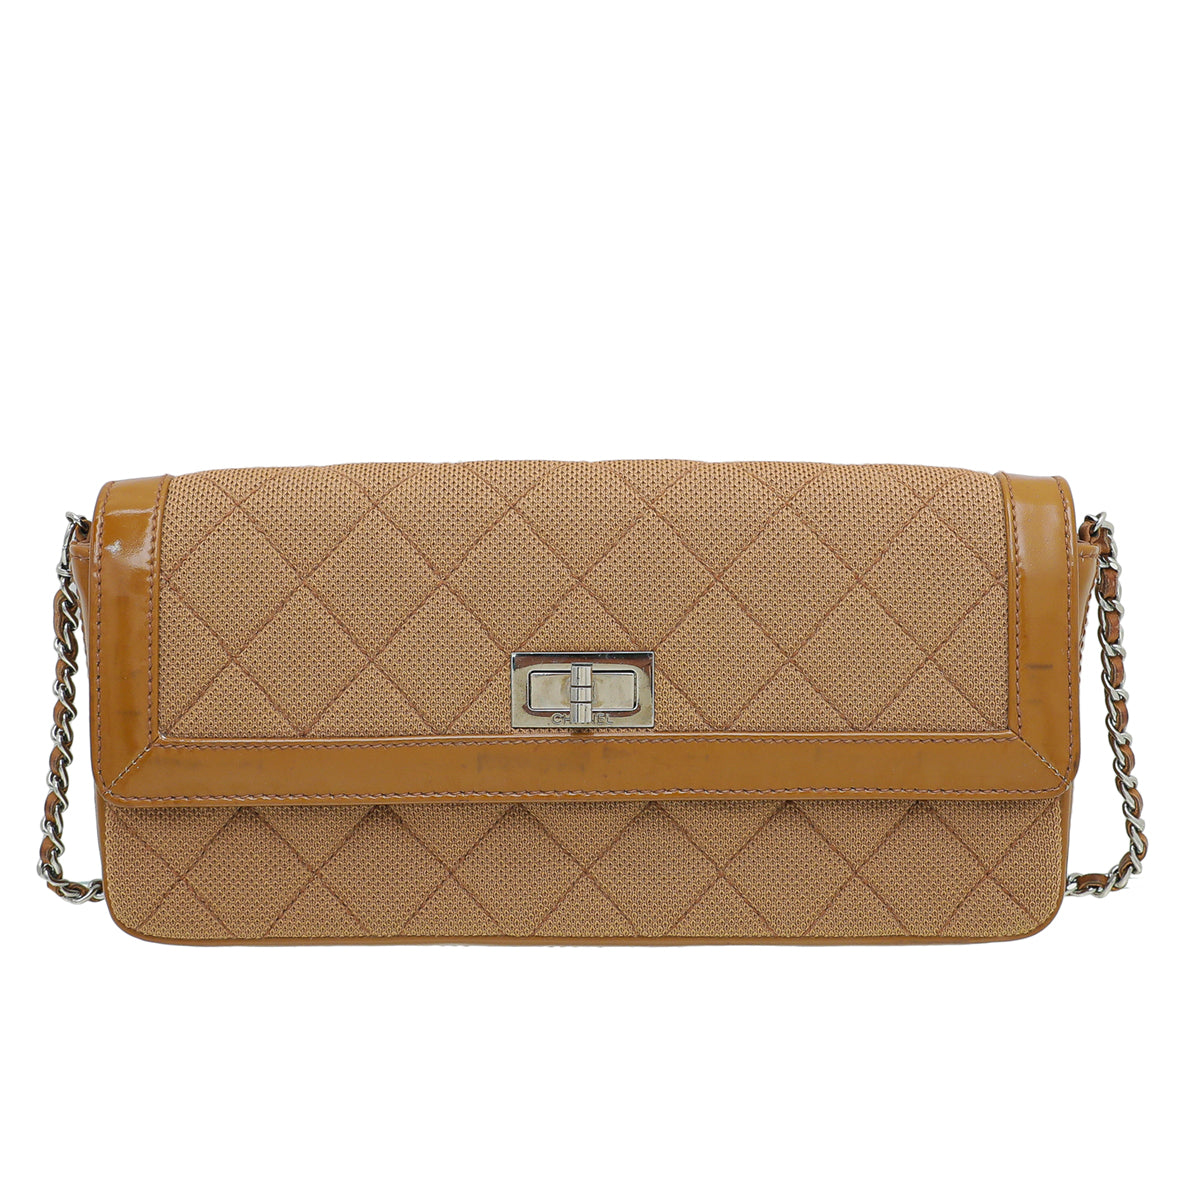 Chanel Brown Reissue East West Jersey Flap Bag